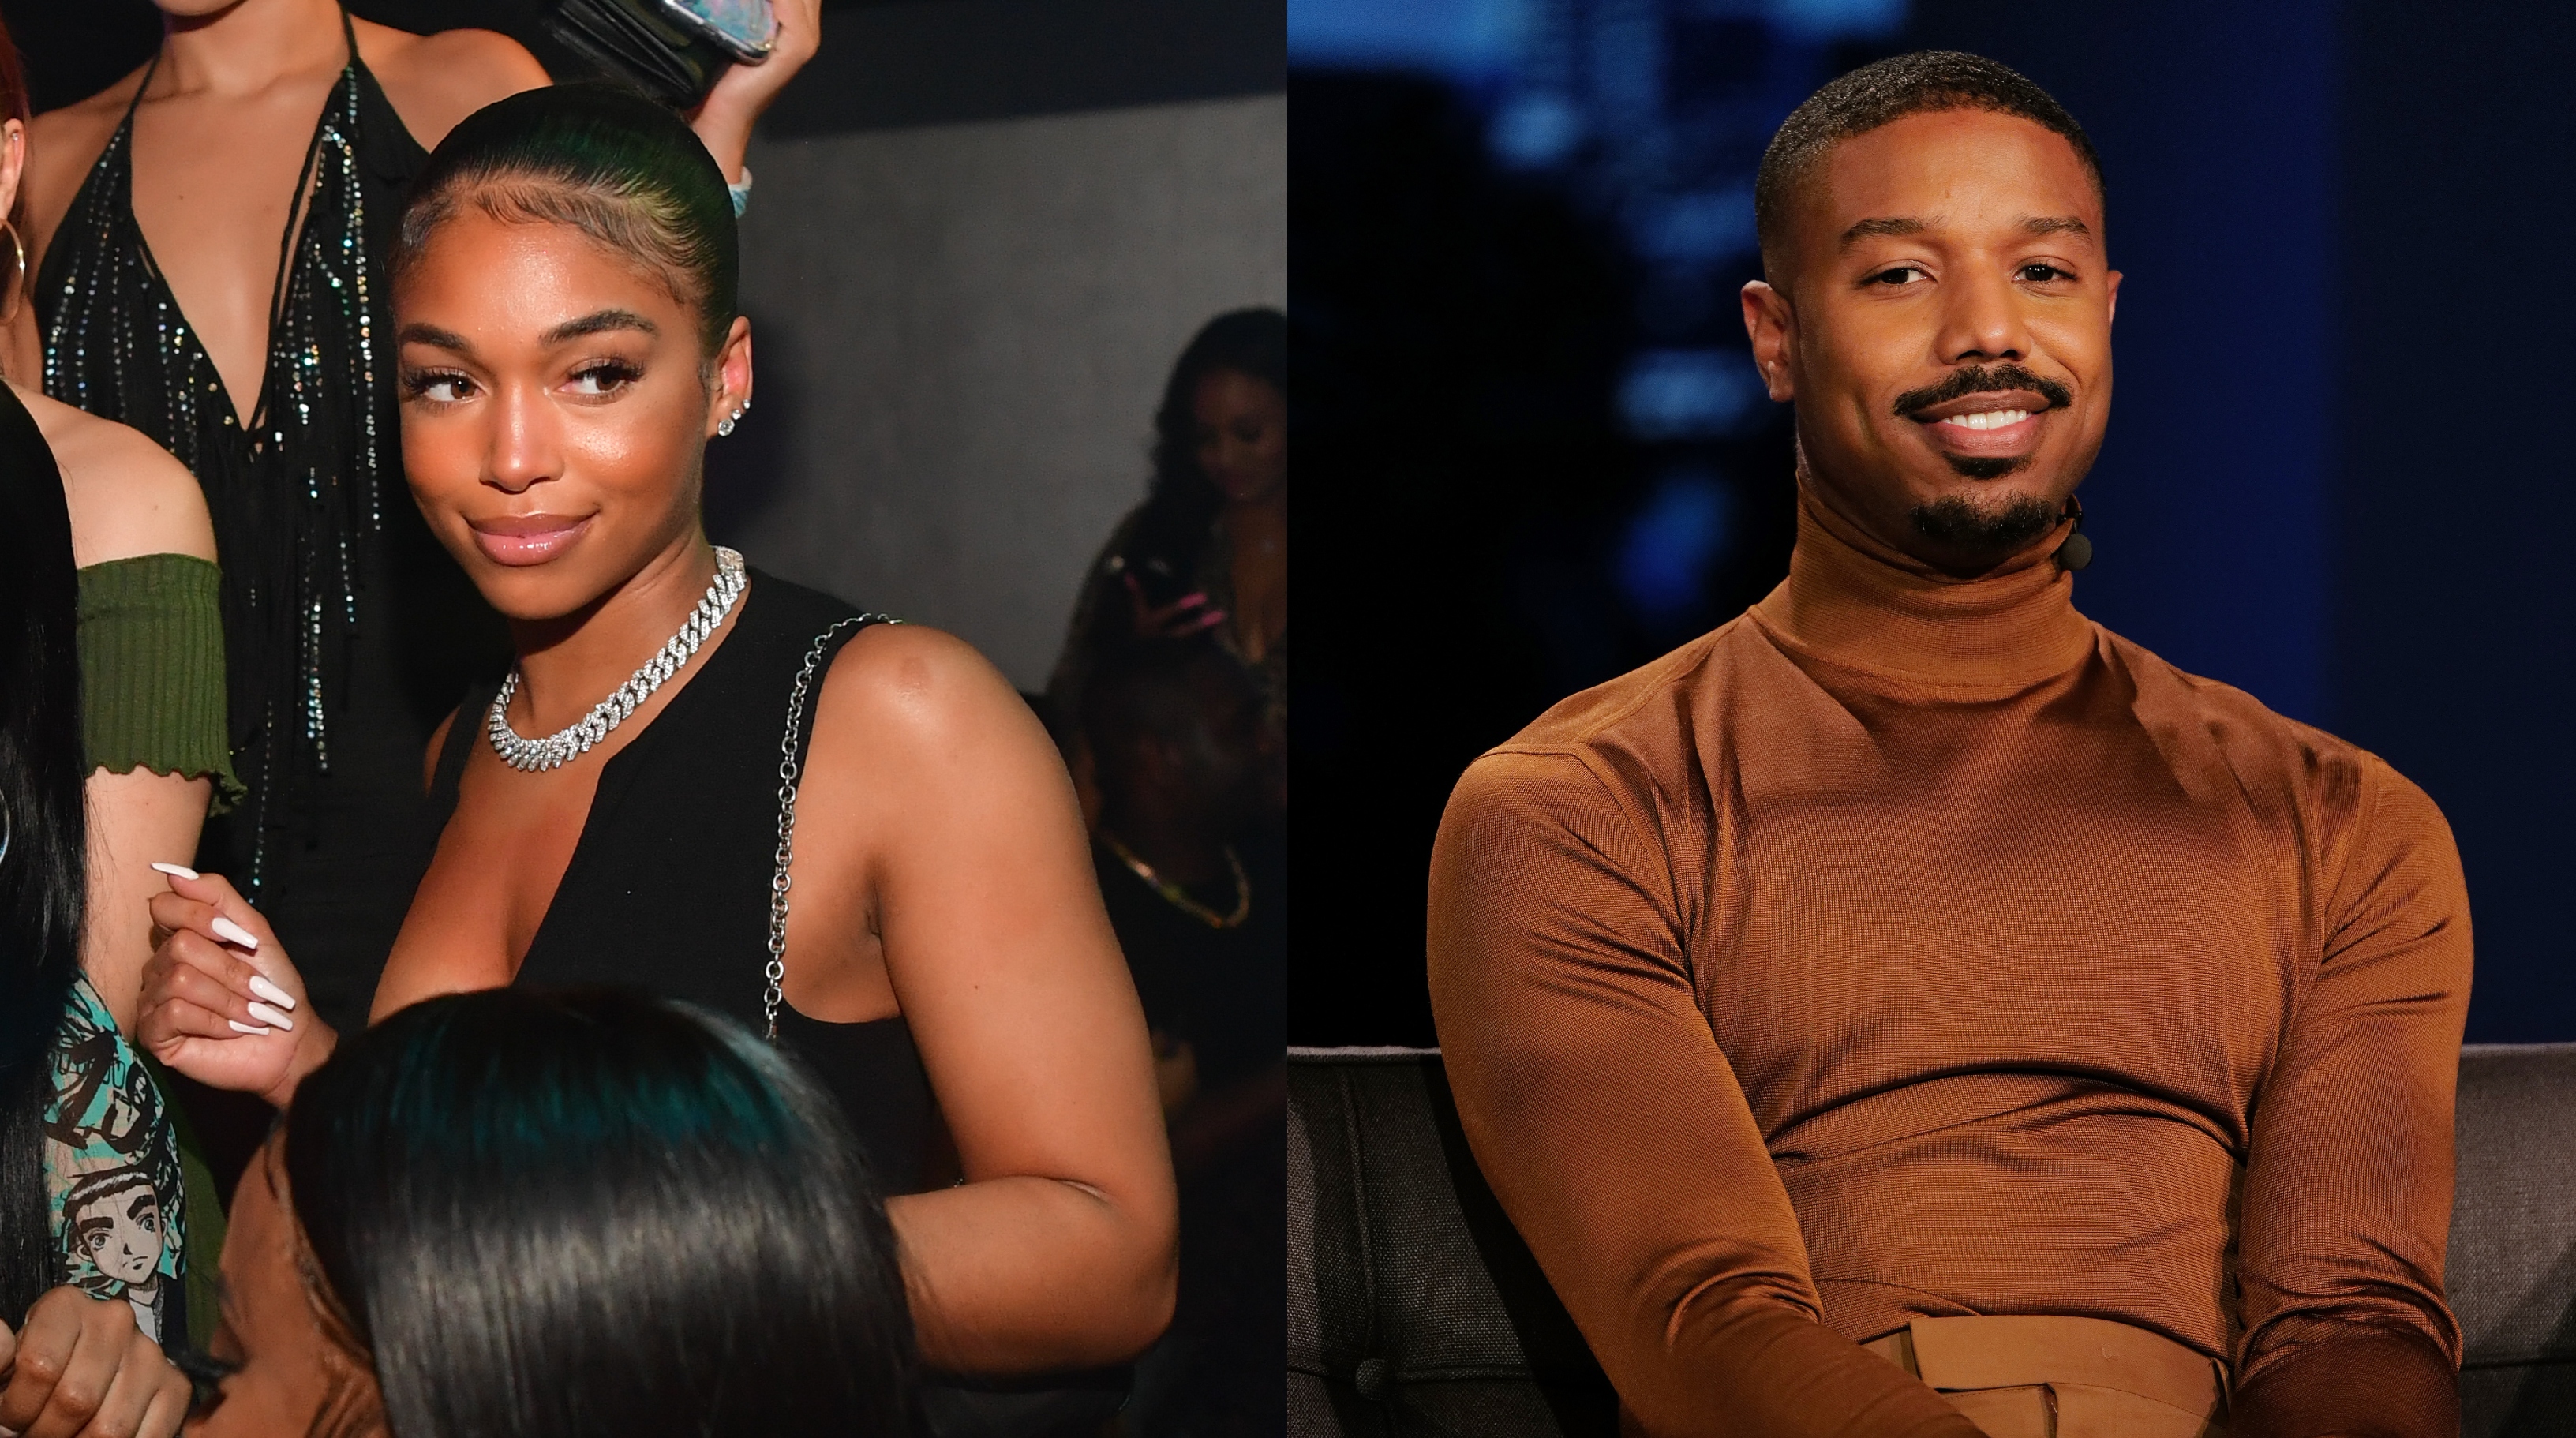 Lori Harvey On SKN By LH and Relationship With Michael B. Jordan